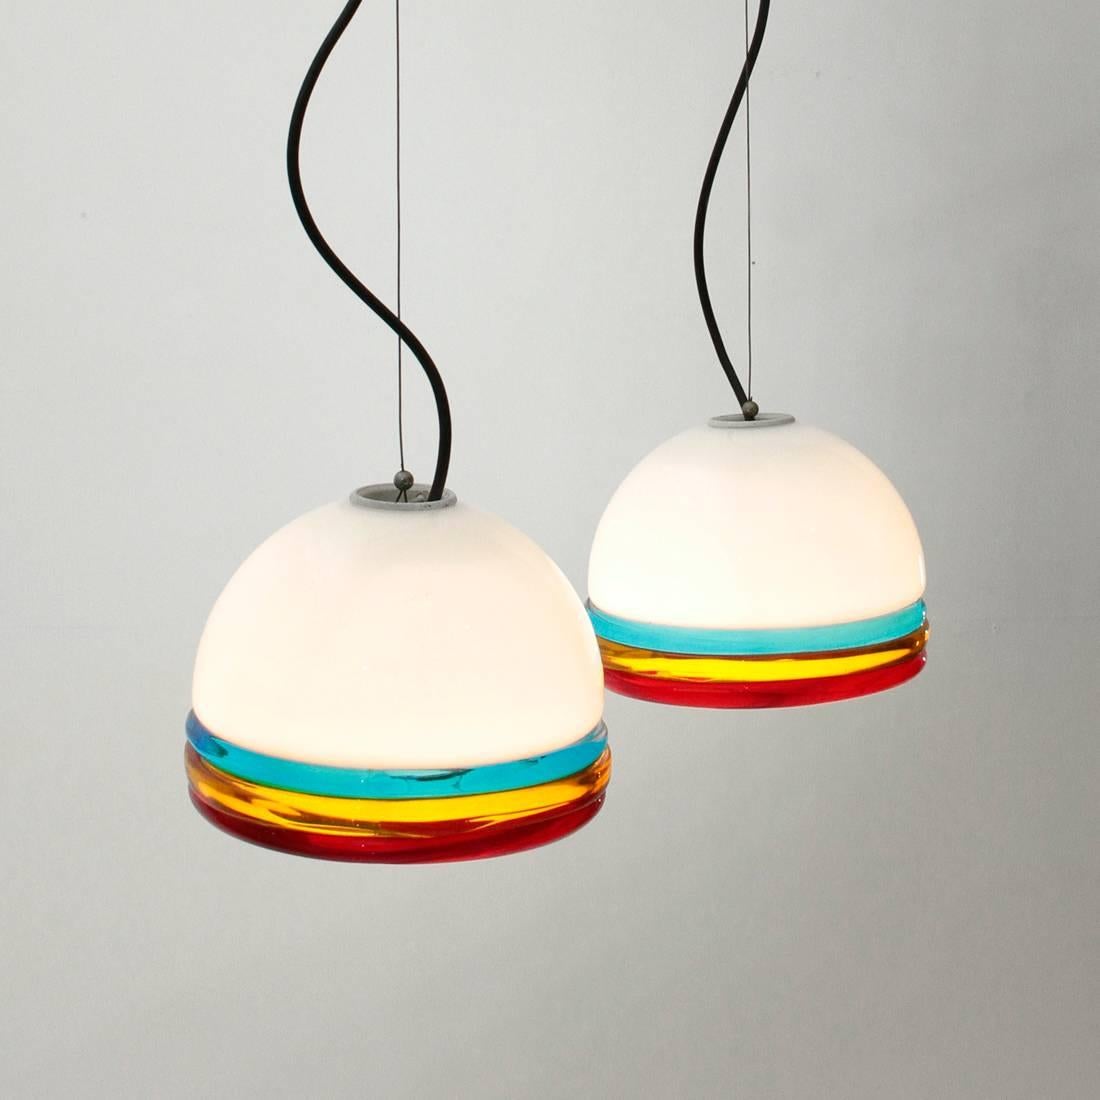 Two pendants of Italian production produced in the late 1960s.
Very thick Murano glass diffusers with colored glass edges.
Lamp holder and ceiling rose in white painted metal.
Good general conditions.

Dimensions: Diameter 20 cm, diffuser